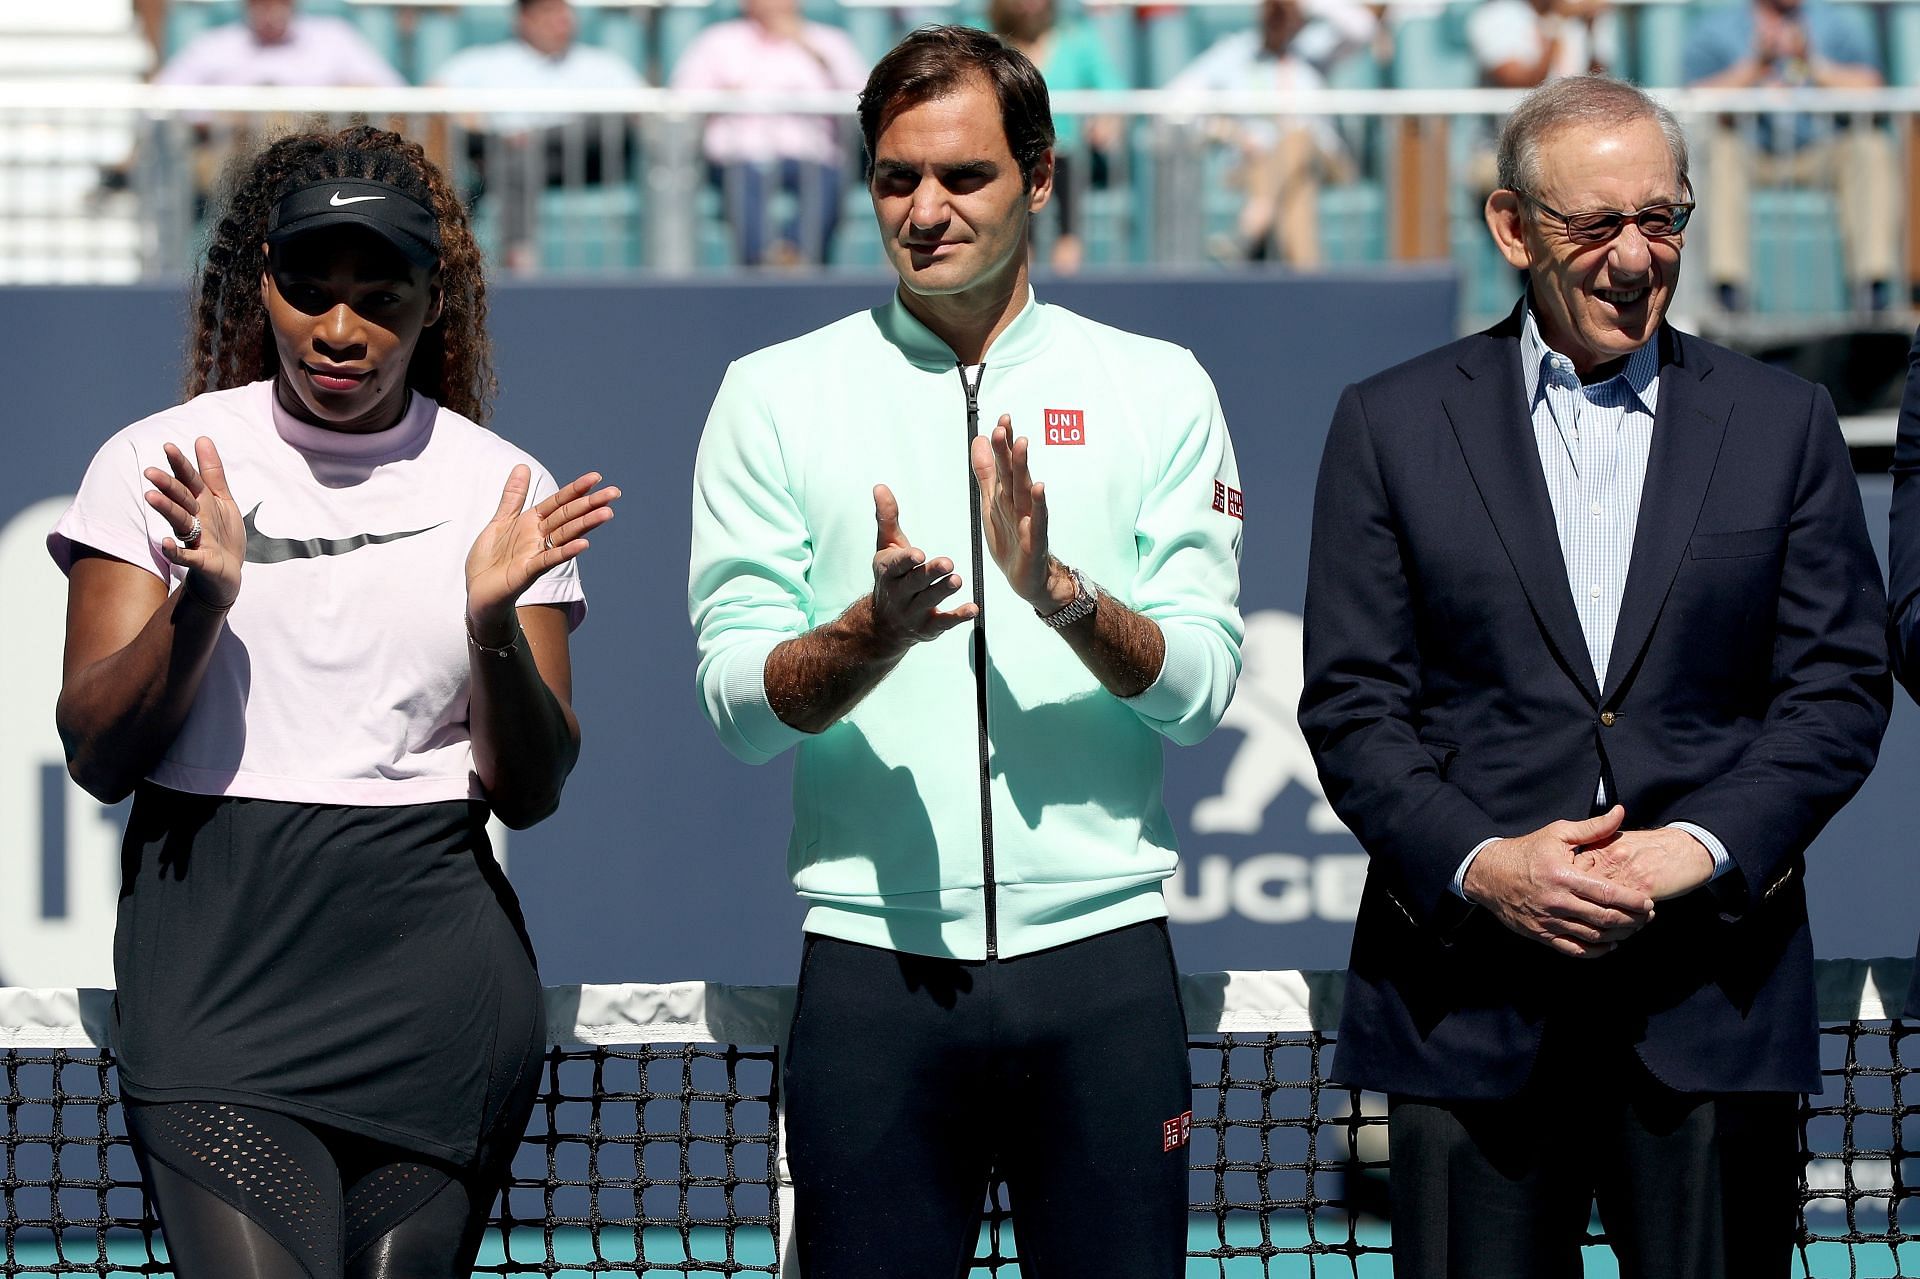 Roger Federer and Serena Williams attend an event at the Miami Open 2019.